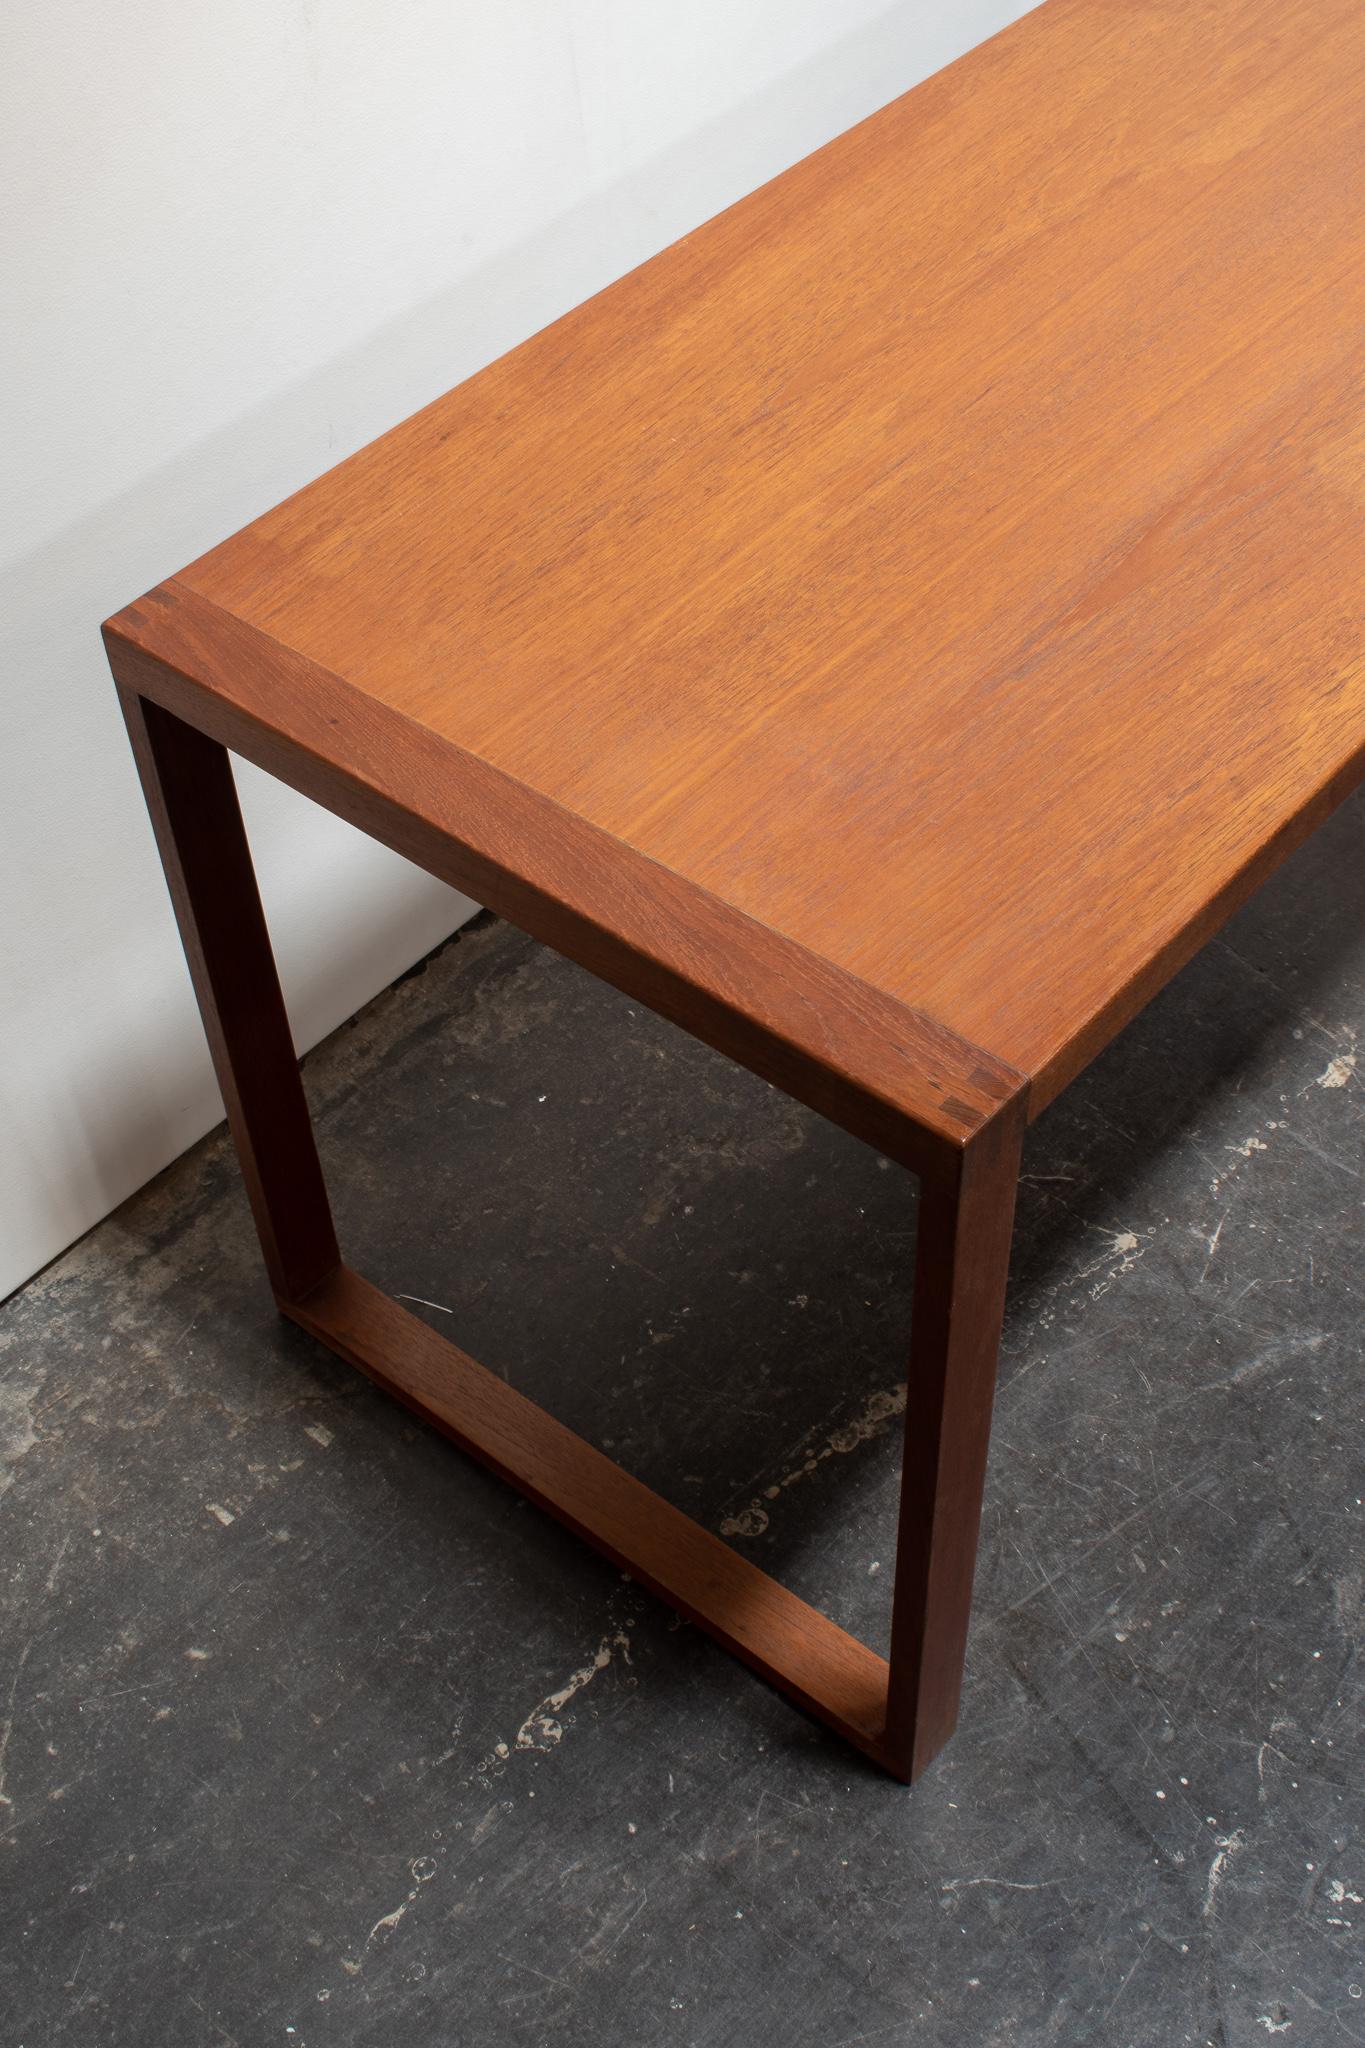 Vintage midcentury Swedish modern coffee table, teak, in excellent condition.